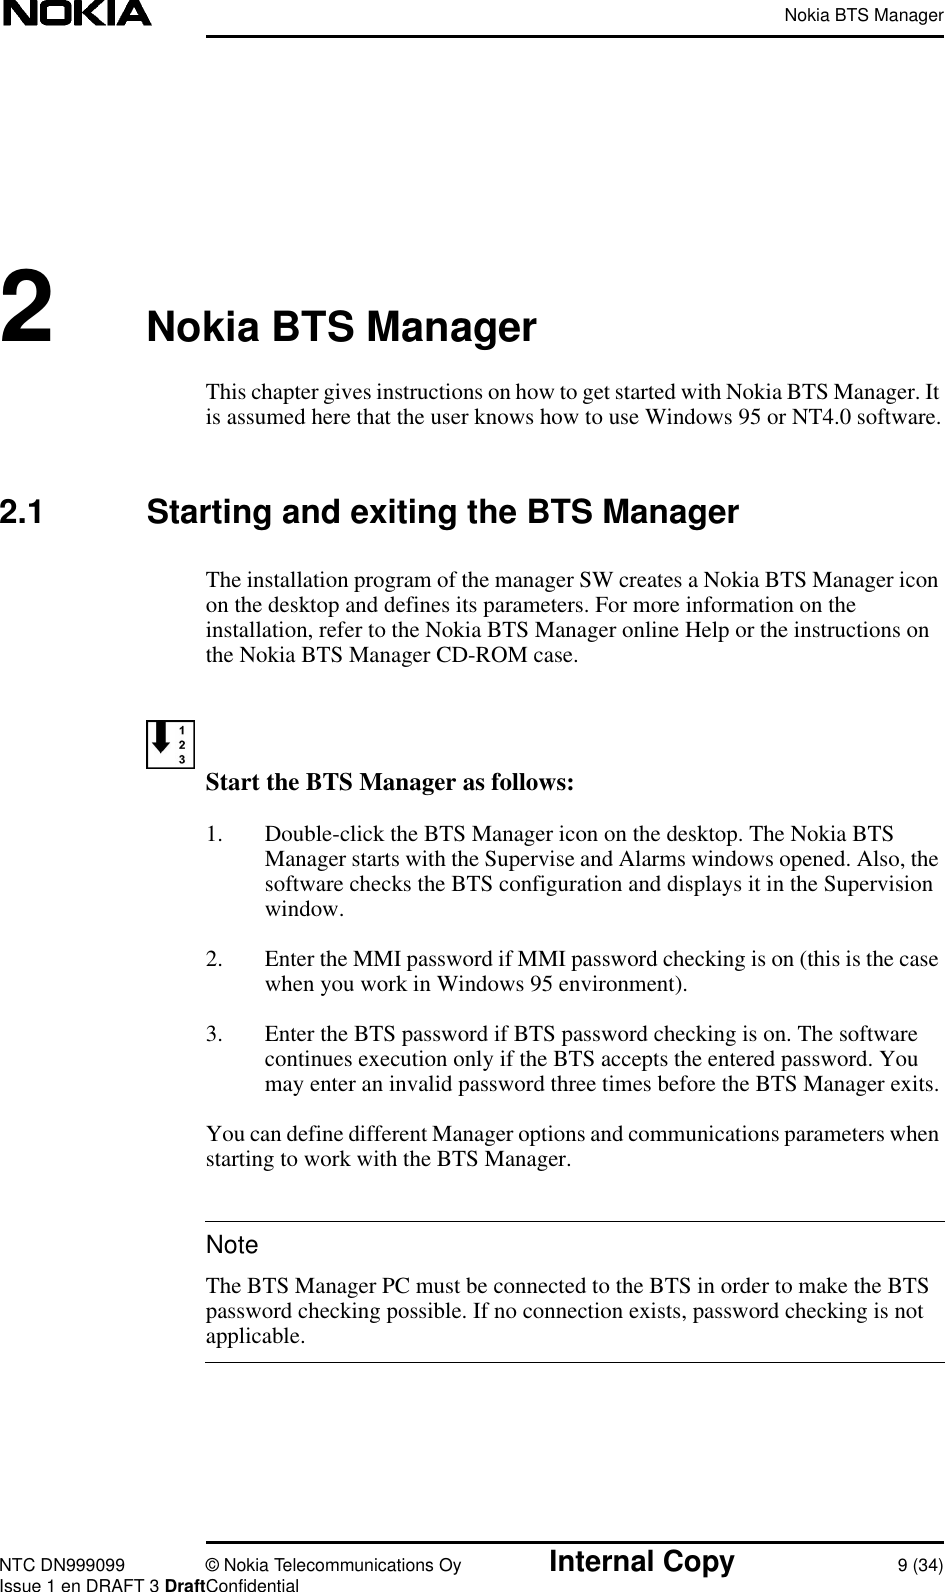 Nokia BTS ManagerNTC DN999099 © Nokia Telecommunications Oy Internal Copy 9 (34)Issue 1 en DRAFT 3 DraftConfidentialNote2Nokia BTS ManagerThis chapter gives instructions on how to get started with Nokia BTS Manager. Itis assumed here that the user knows how to use Windows 95 or NT4.0 software.2.1 Starting and exiting the BTS ManagerThe installation program of the manager SW creates a Nokia BTS Manager iconon the desktop and defines its parameters. For more information on theinstallation, refer to the Nokia BTS Manager online Help or the instructions onthe Nokia BTS Manager CD-ROM case.Start the BTS Manager as follows:1. Double-click the BTS Manager icon on the desktop. The Nokia BTSManager starts with the Supervise and Alarms windows opened. Also, thesoftware checks the BTS configuration and displays it in the Supervisionwindow.2. Enter the MMI password if MMI password checking is on (this is the casewhen you work in Windows 95 environment).3. Enter the BTS password if BTS password checking is on. The softwarecontinues execution only if the BTS accepts the entered password. Youmay enter an invalid password three times before the BTS Manager exits.You can define different Manager options and communications parameters whenstarting to work with the BTS Manager.The BTS Manager PC must be connected to the BTS in order to make the BTSpassword checking possible. If no connection exists, password checking is notapplicable.